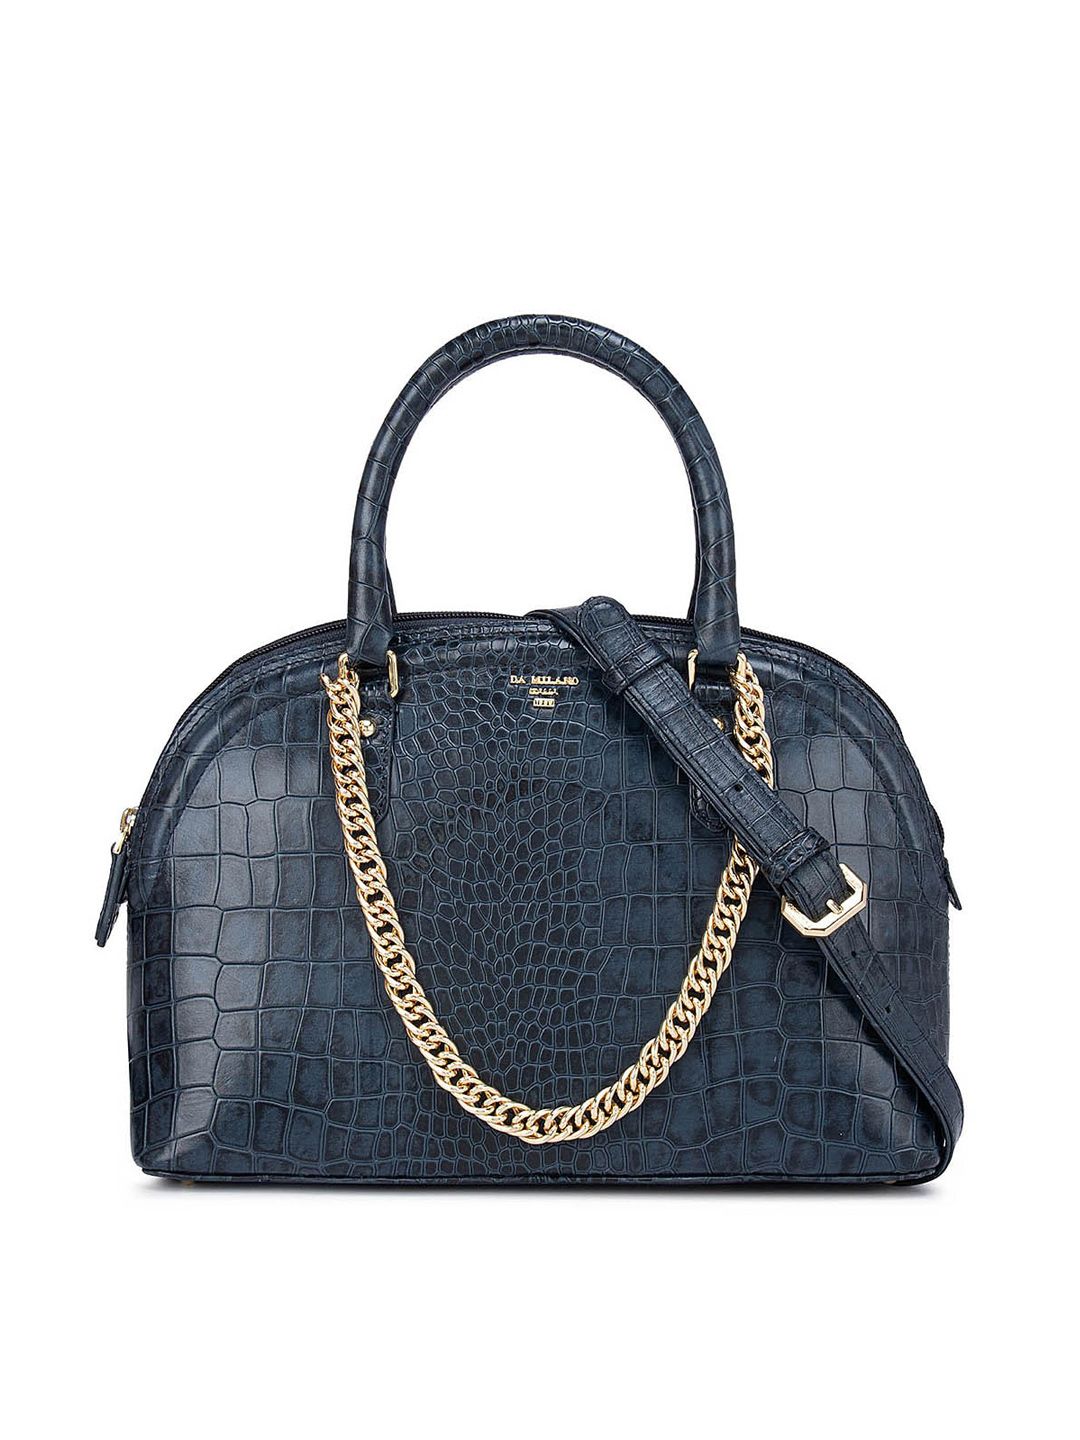 Da Milano Blue Textured Leather Swagger Handheld Bag Price in India